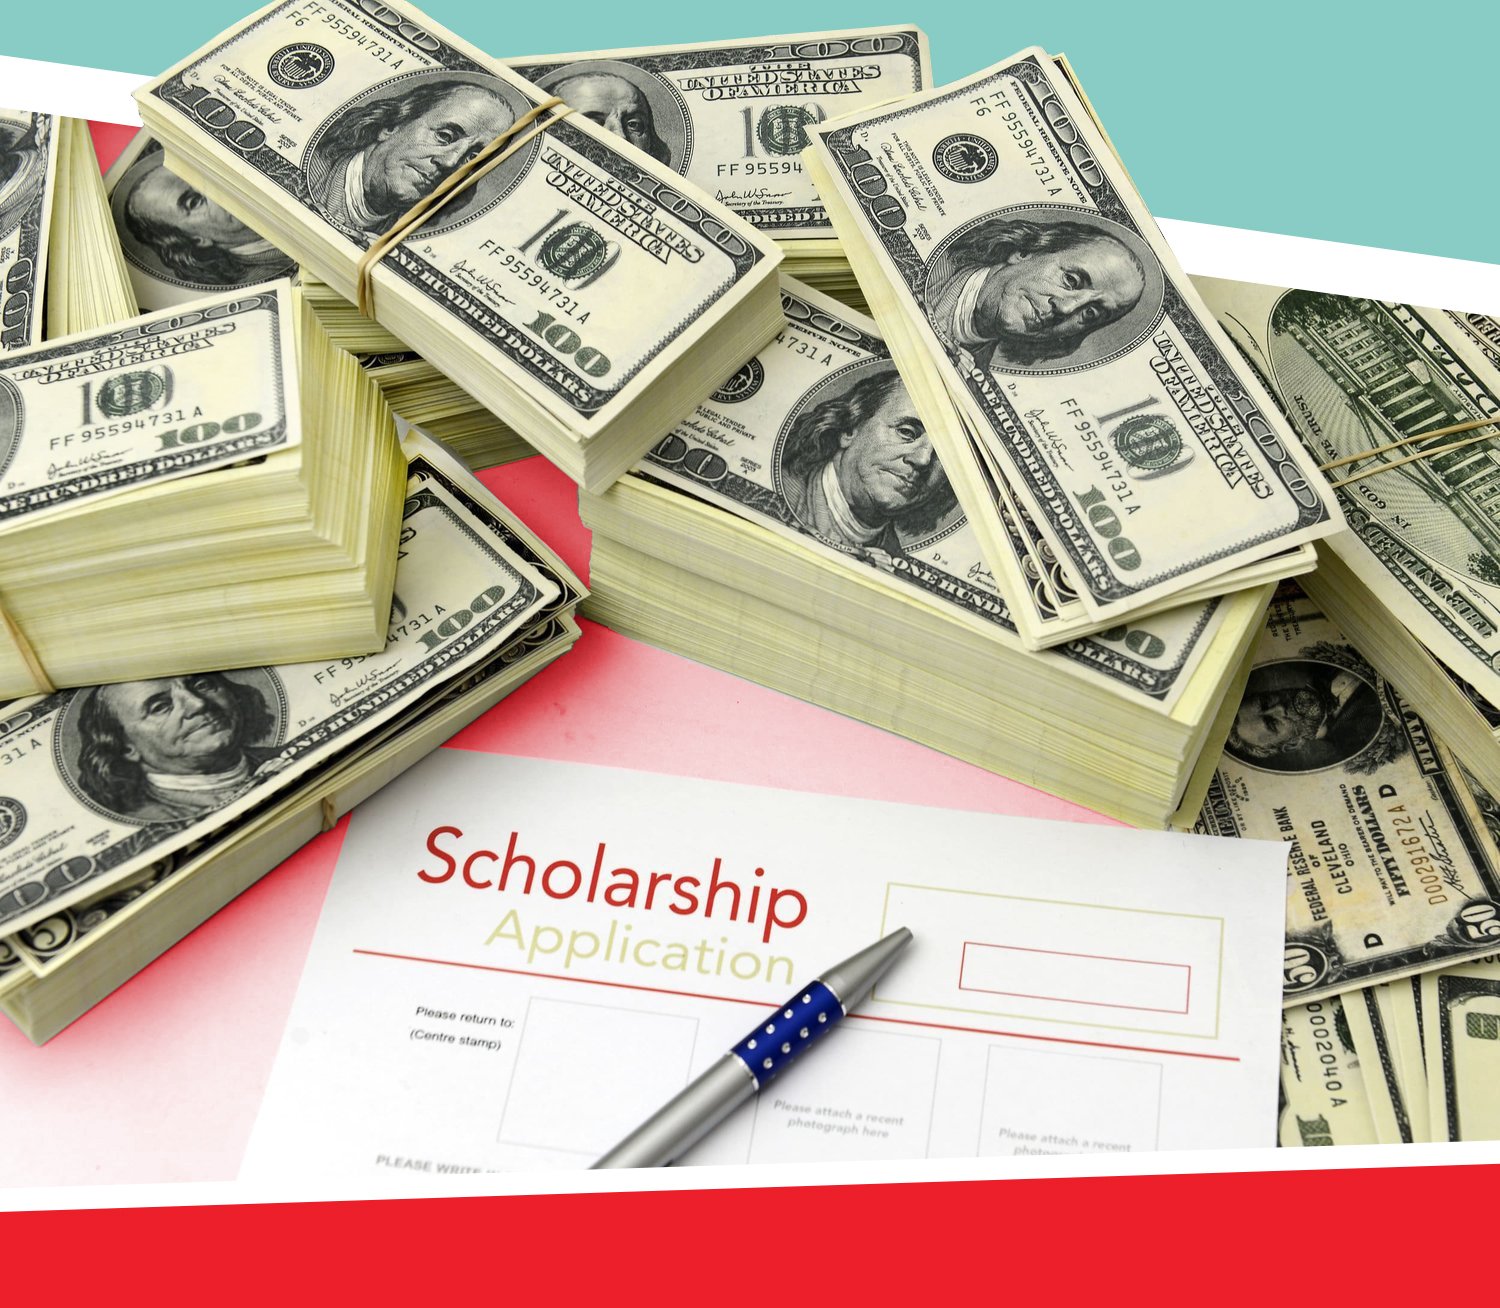 Which Of The Following Tactics Is Most Helpful When Applying For Scholarships?